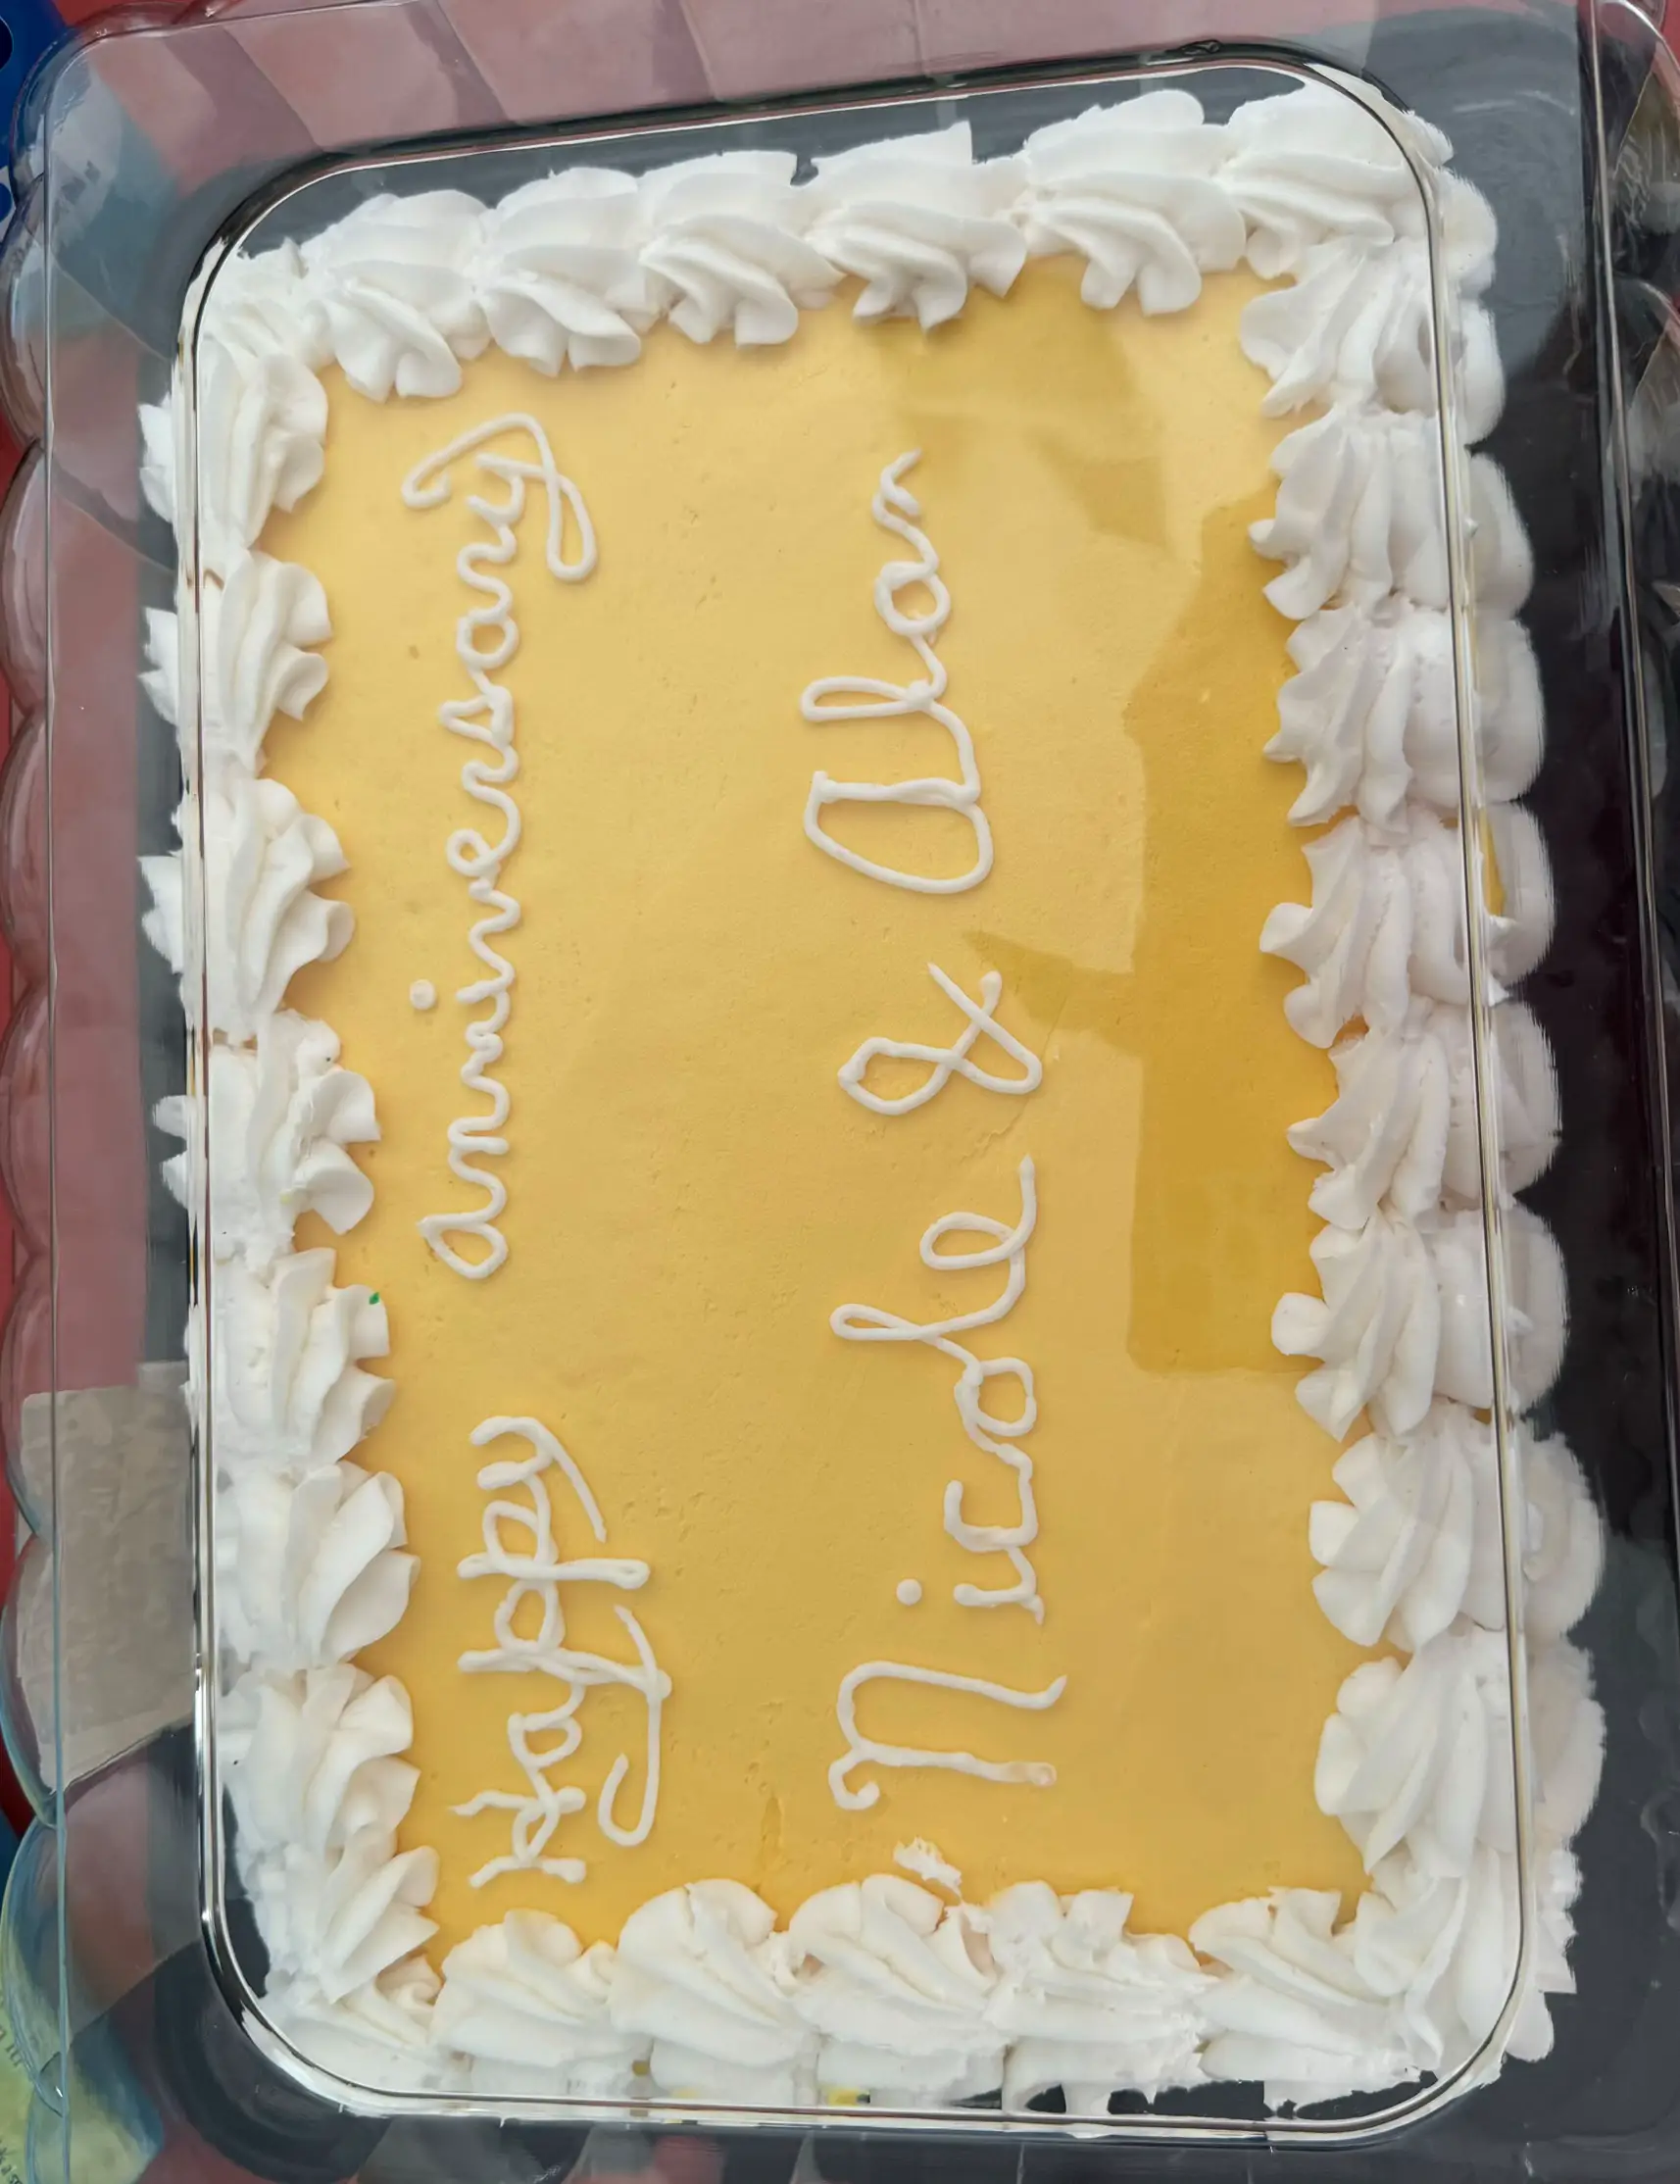  A cake with a xanh rờn design on it.